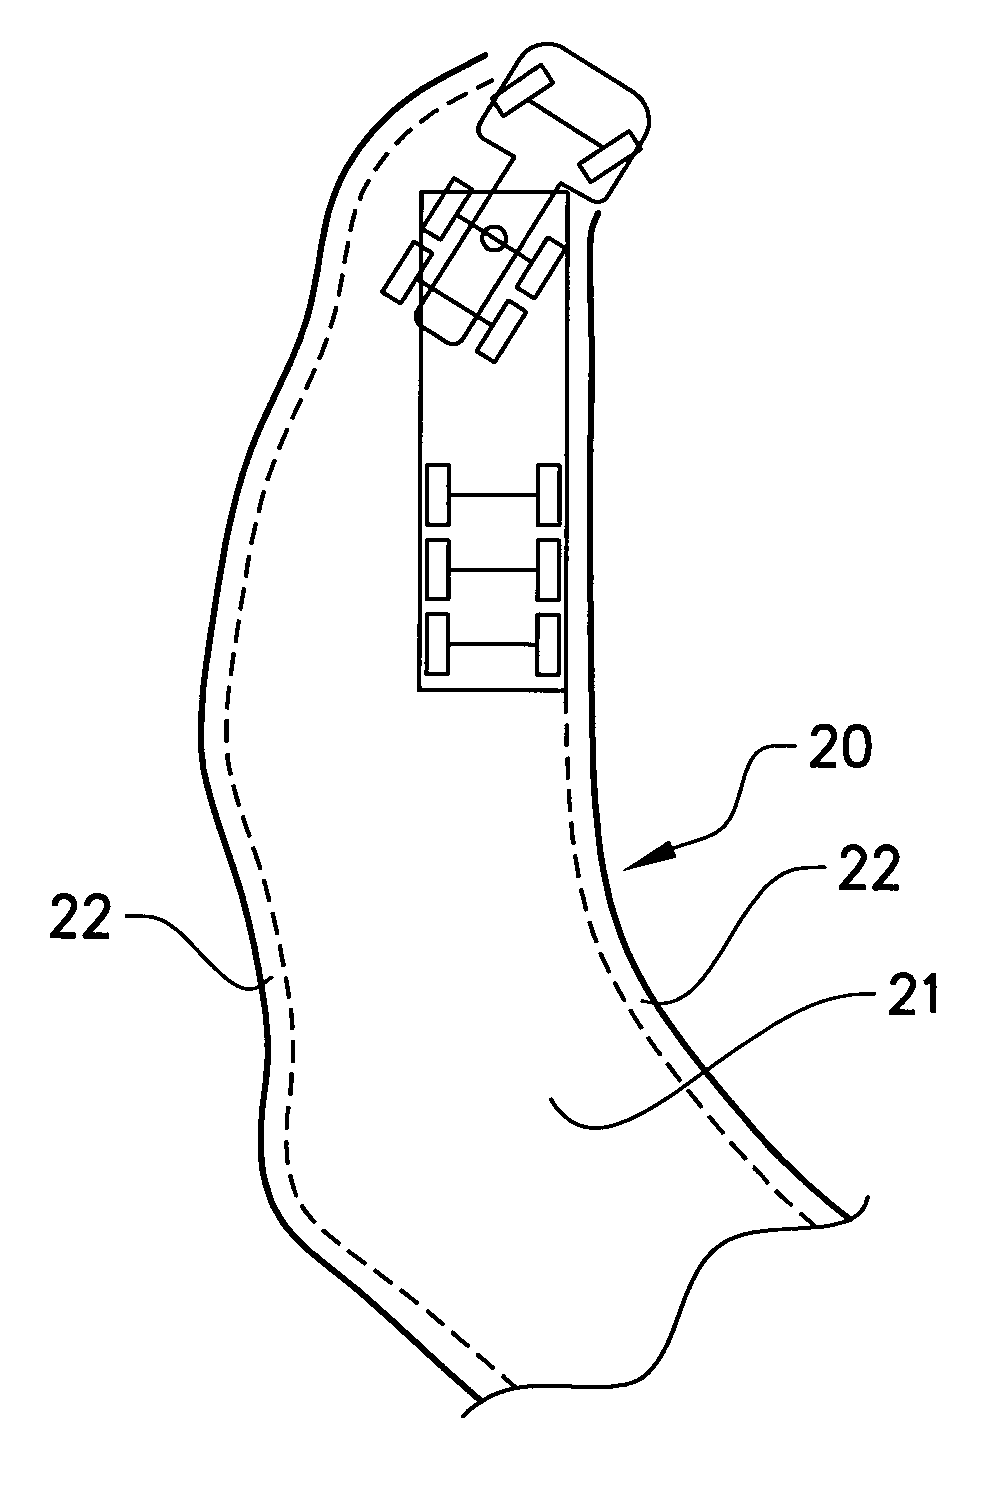 Method for assisting the reversal of an articulated vehicle